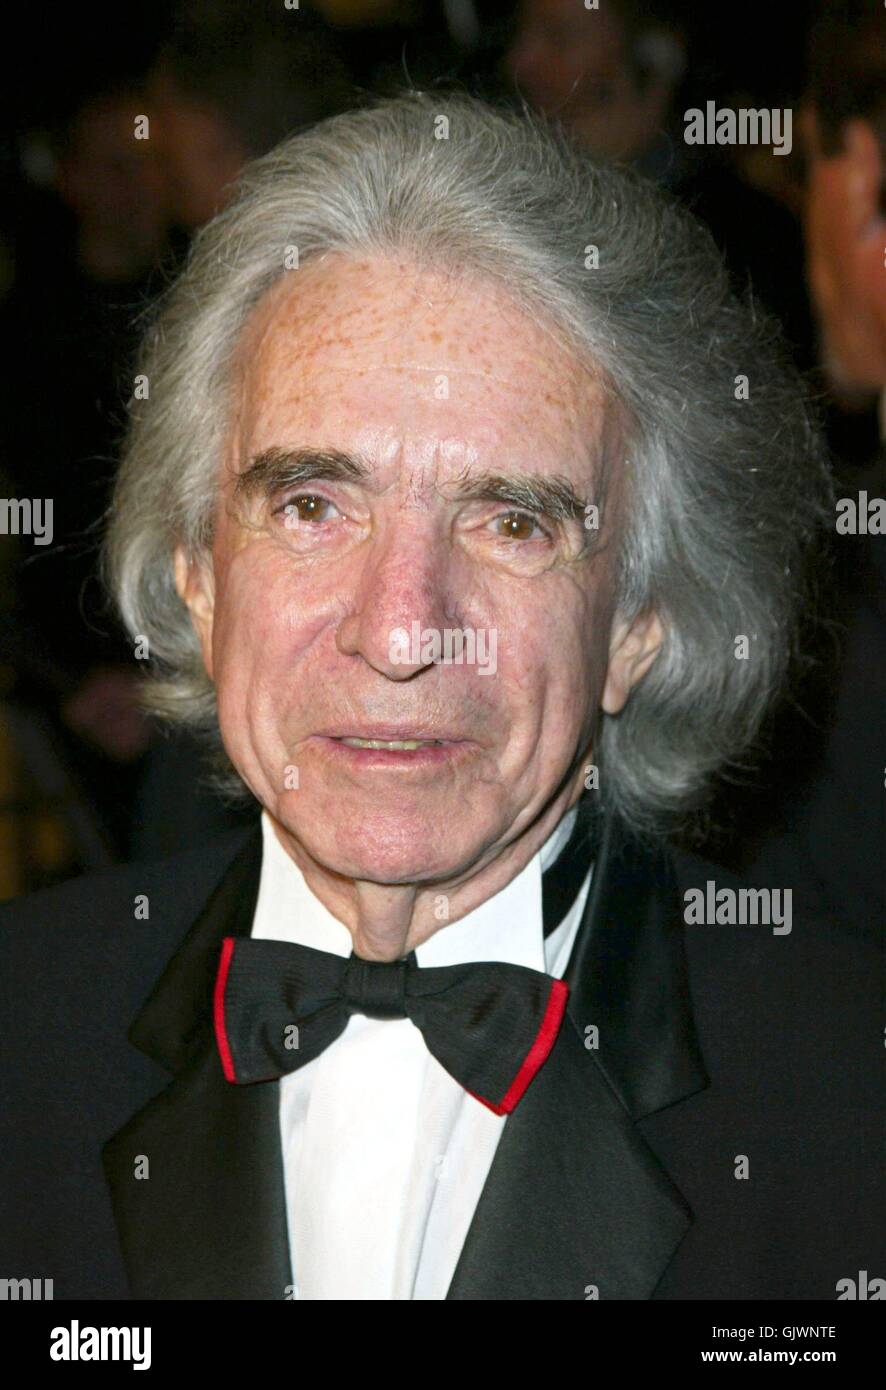 (dpa) - Film director Arthur Hiller at the 'Vanity Fair' party in Morton's Restaurant following the Oscar award ceremony in Los Angeles, 24 March 2002. Hiller, who became famous in 1970s for directing 'Love Story', received the Jean Hersholt Humanitarian Award at the 74th Oscar award show. | usage worldwide Stock Photo